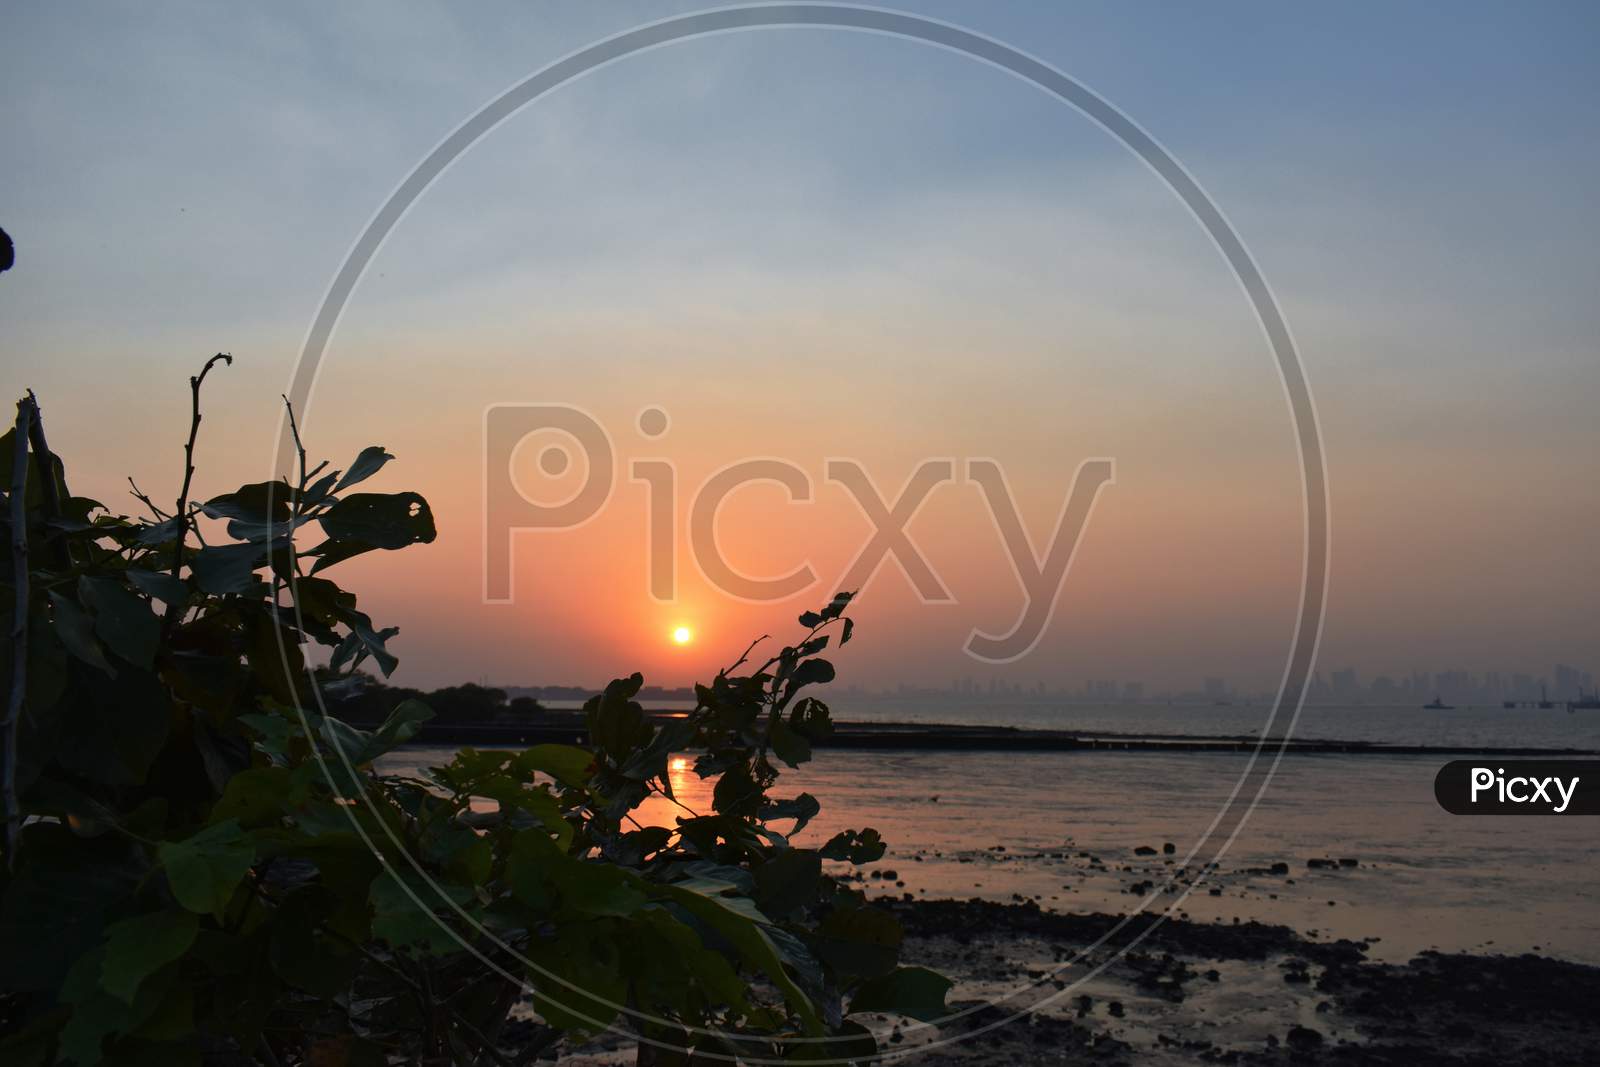 Silhouette Image Of Plants Captured During Sunset Just Beside The Ocean.